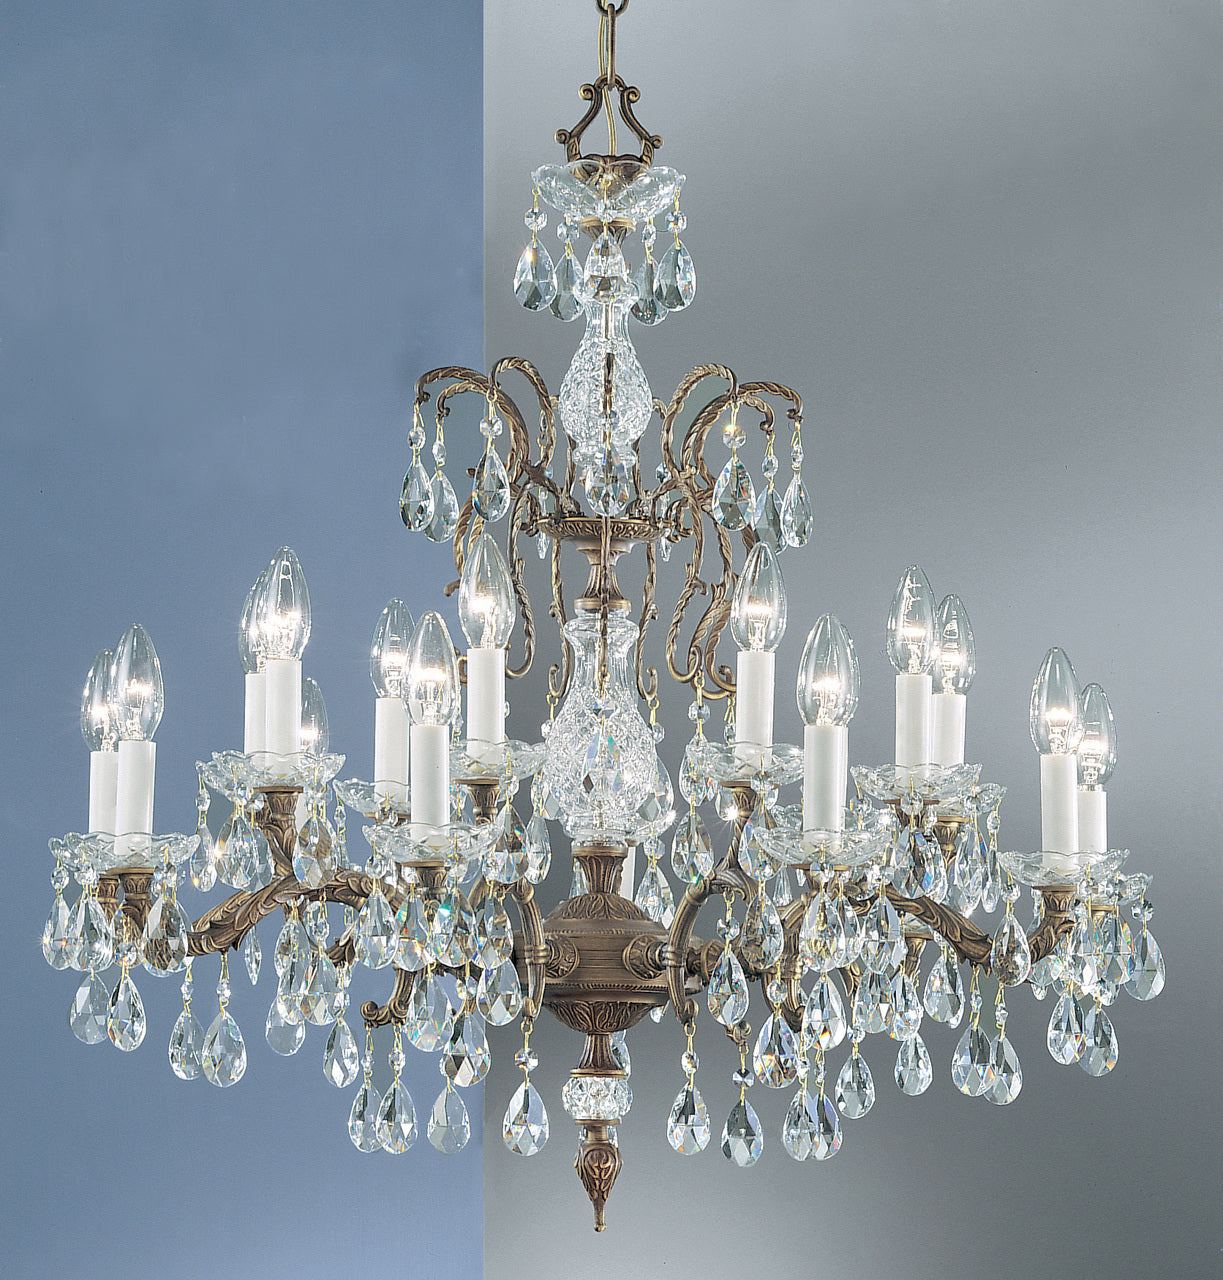 Classic Lighting 5538 RB S Madrid Crystal/Cast Brass Chandelier in Roman Bronze (Imported from Spain)